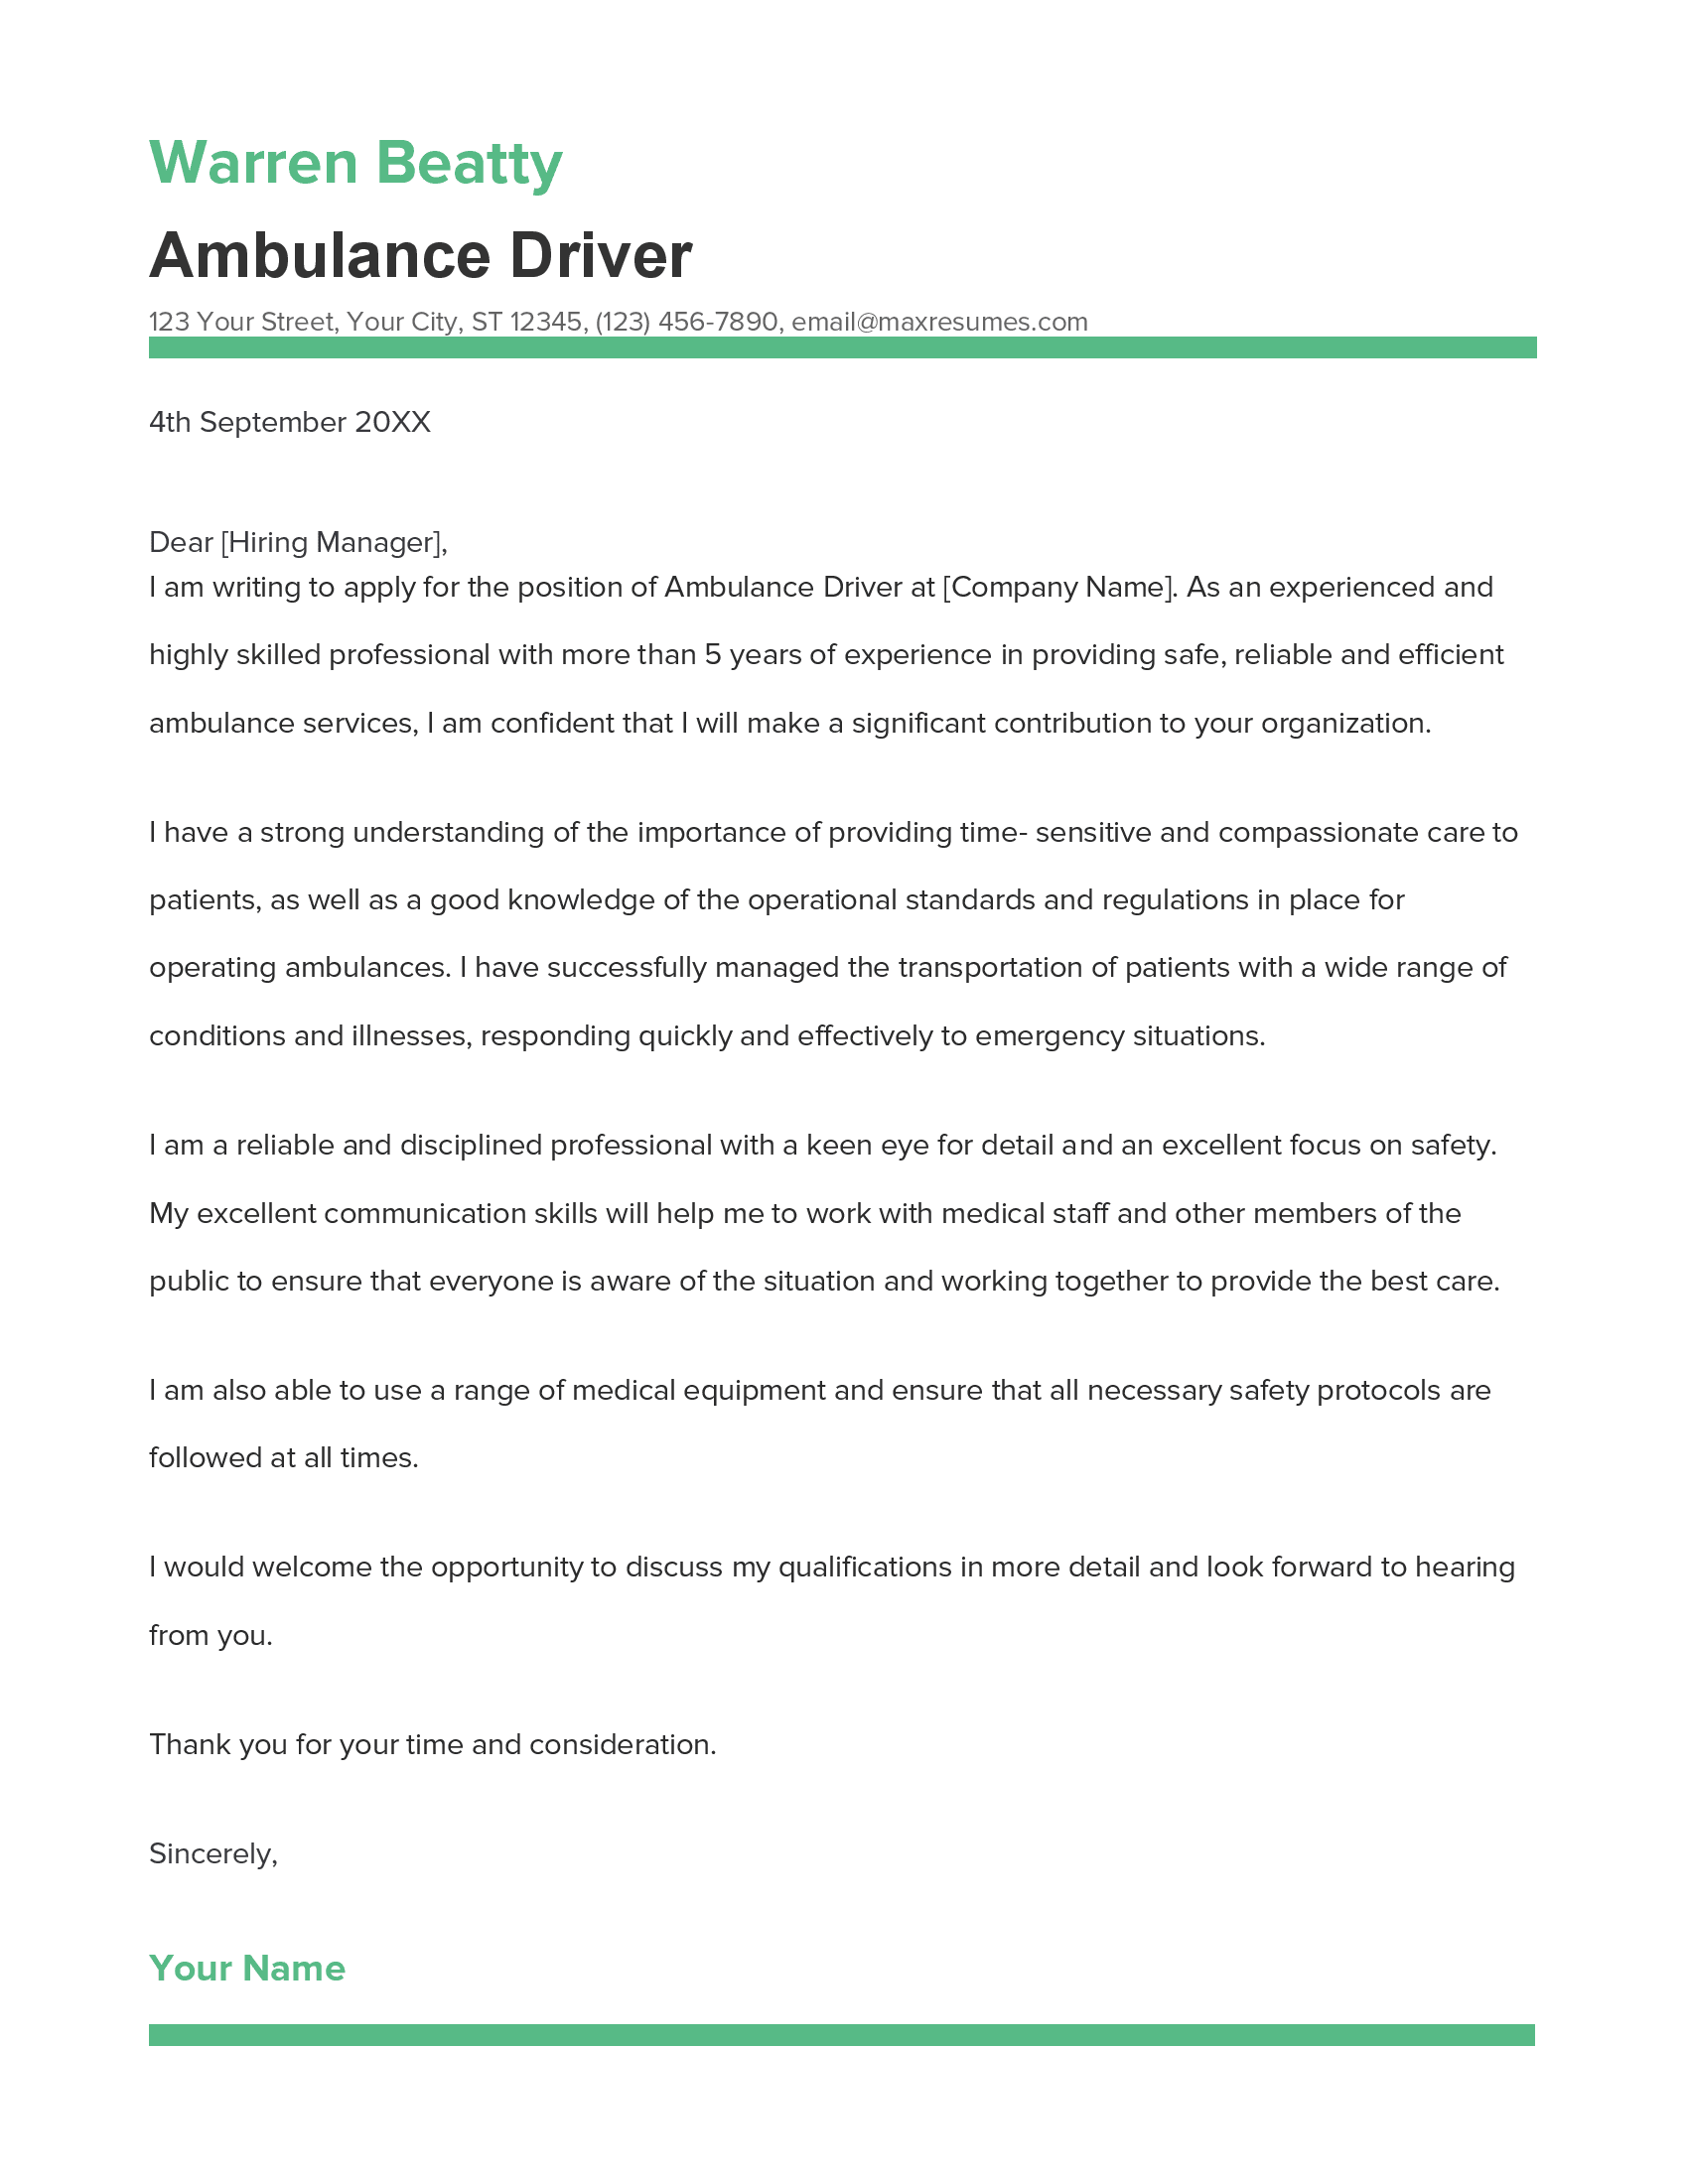 Ambulance Driver Cover Letter Example